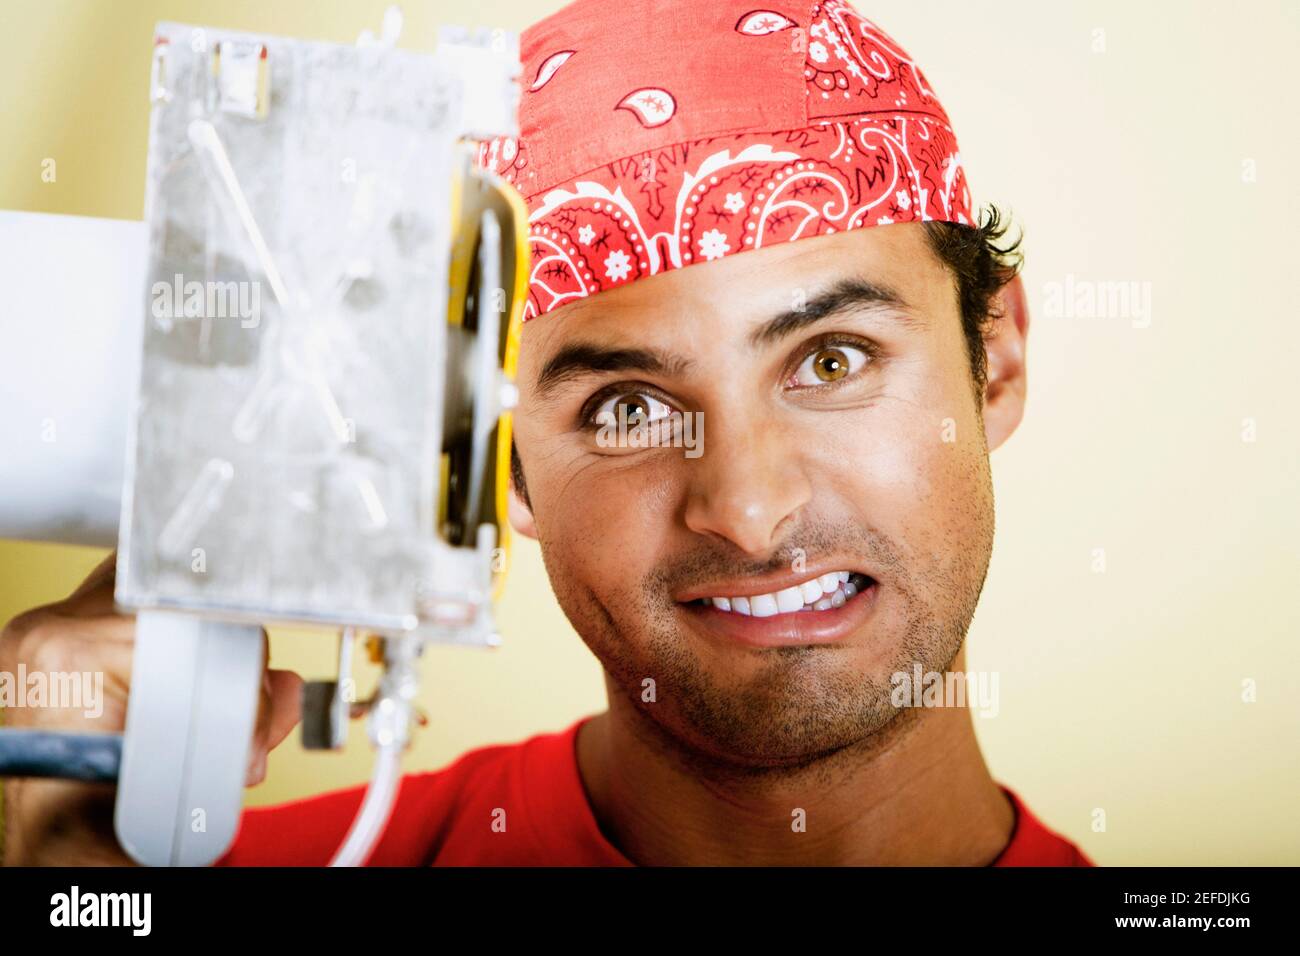 Portrait of a young man holding a circular saw and clenching his teeth Stock Photo